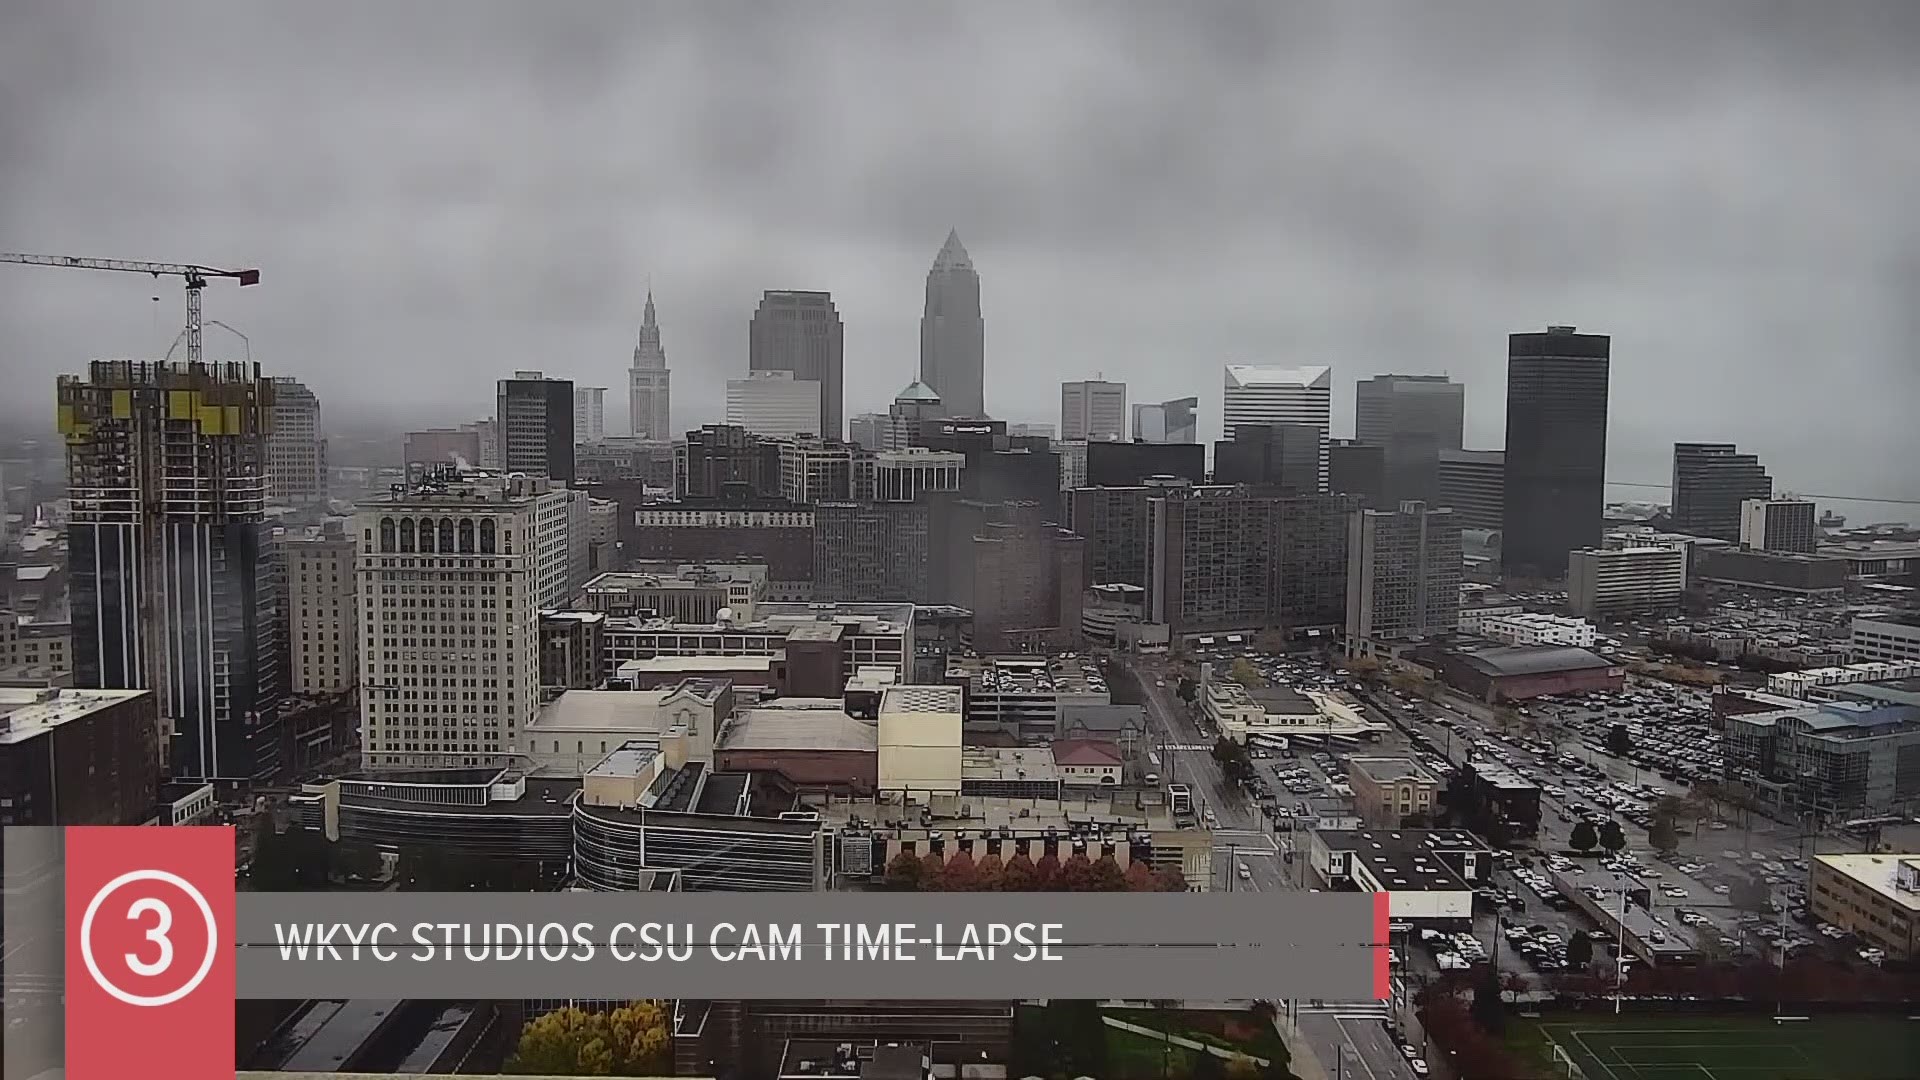 The snow flurries were flying this afternoon. Check out our Thursday afternoon weather time-lapse from the WKYC Studios CSU Cam. 'Tis the season! #3weather